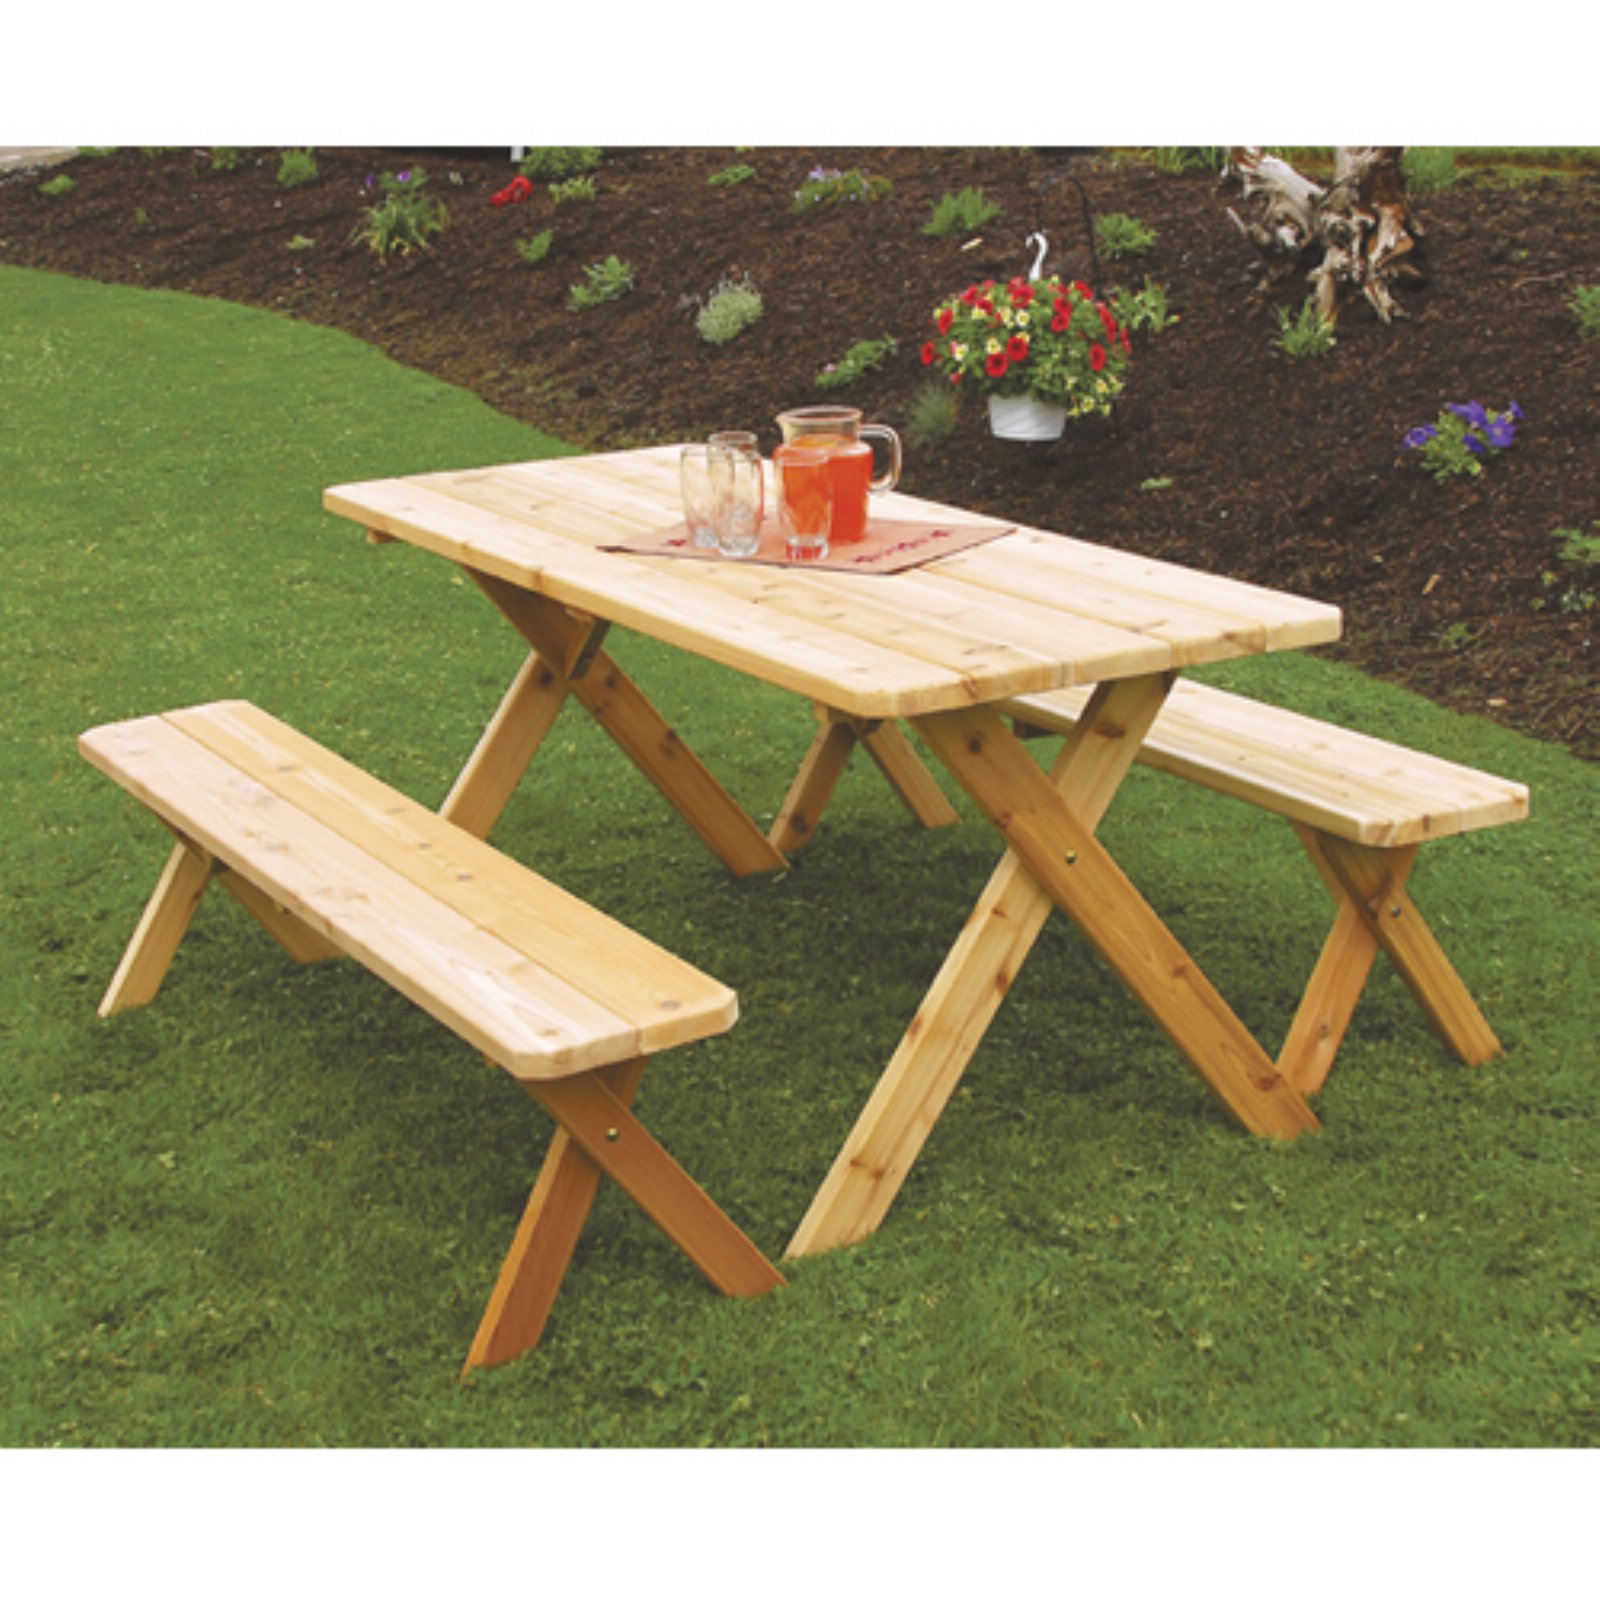 A &amp; L Furniture Western Red Cedar Crossleg Picnic Table with 2 Benches - image 1 of 2